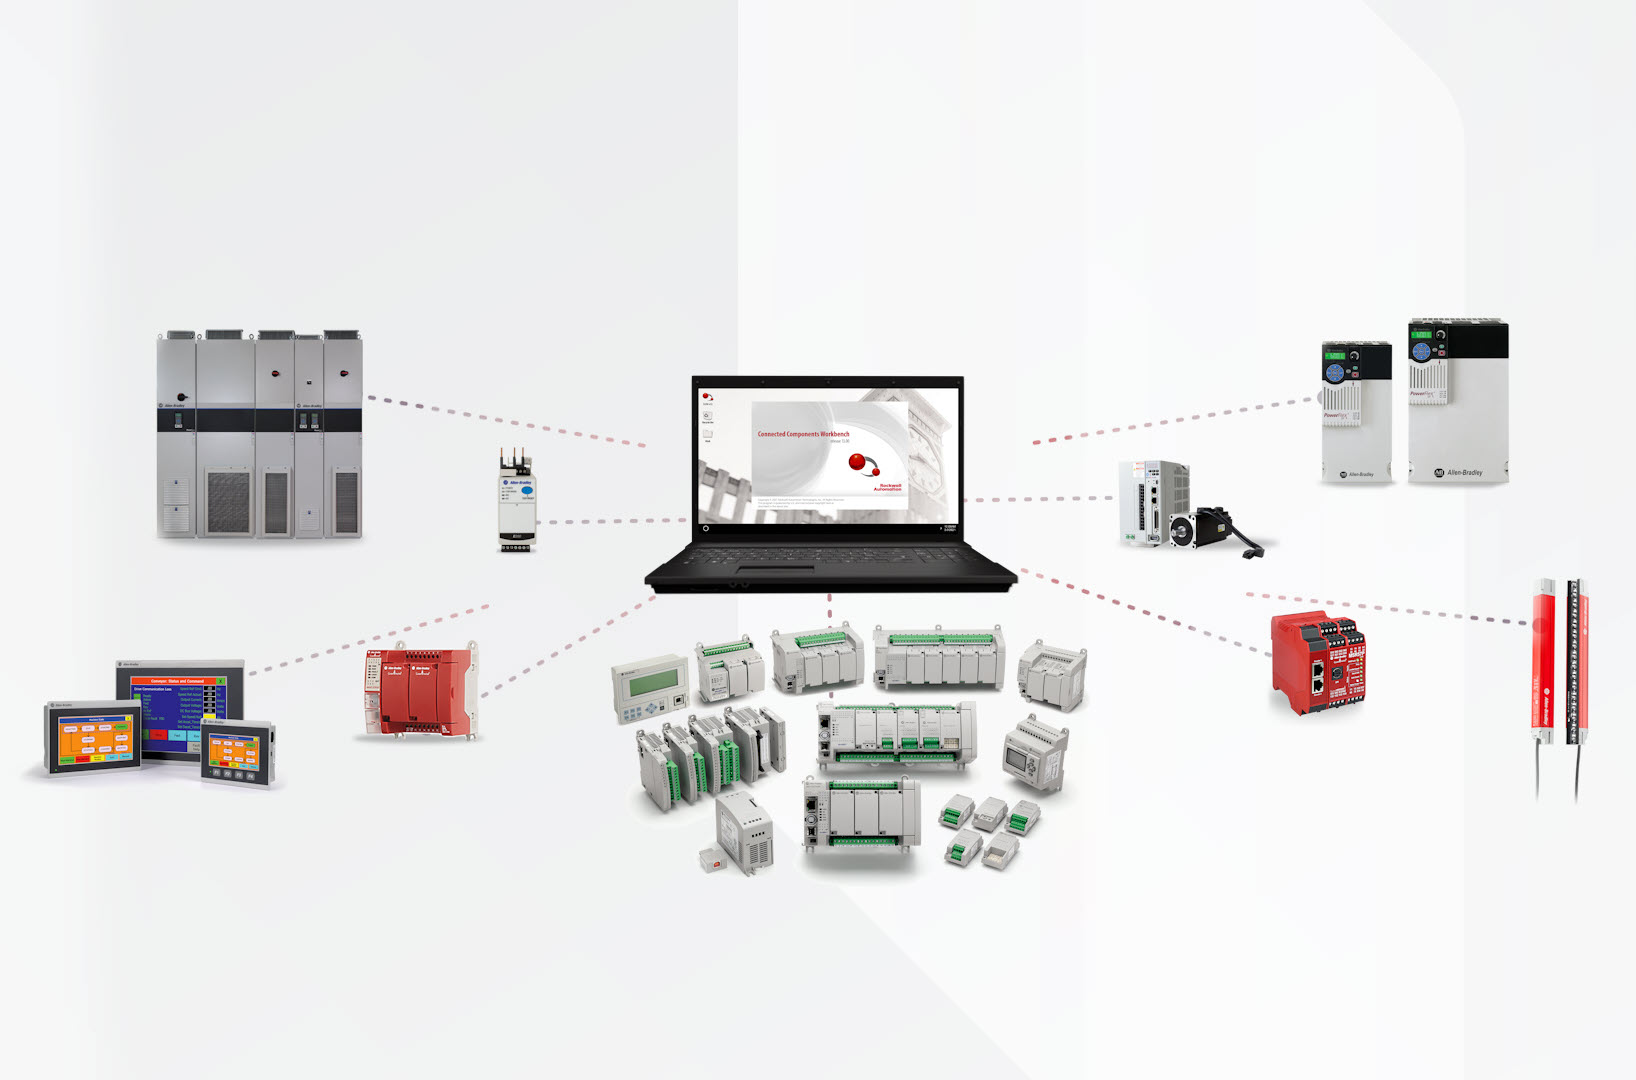 Connected components. Rockwell Automation Server.